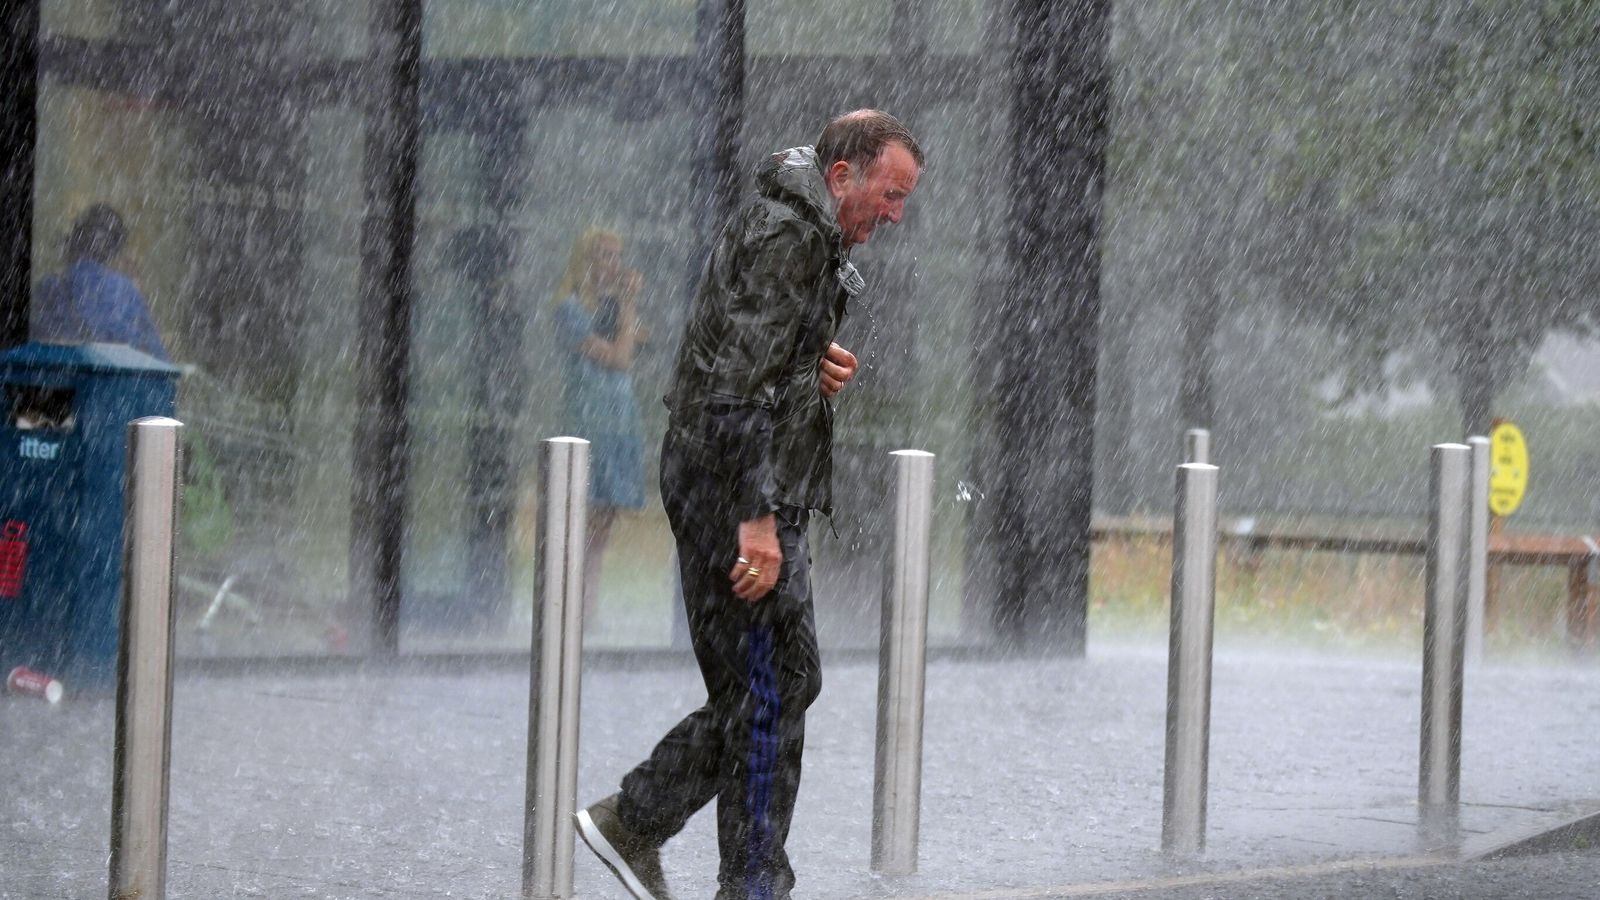 UK weather: Yellow warnings in place across northern England and Wales for heavy rain